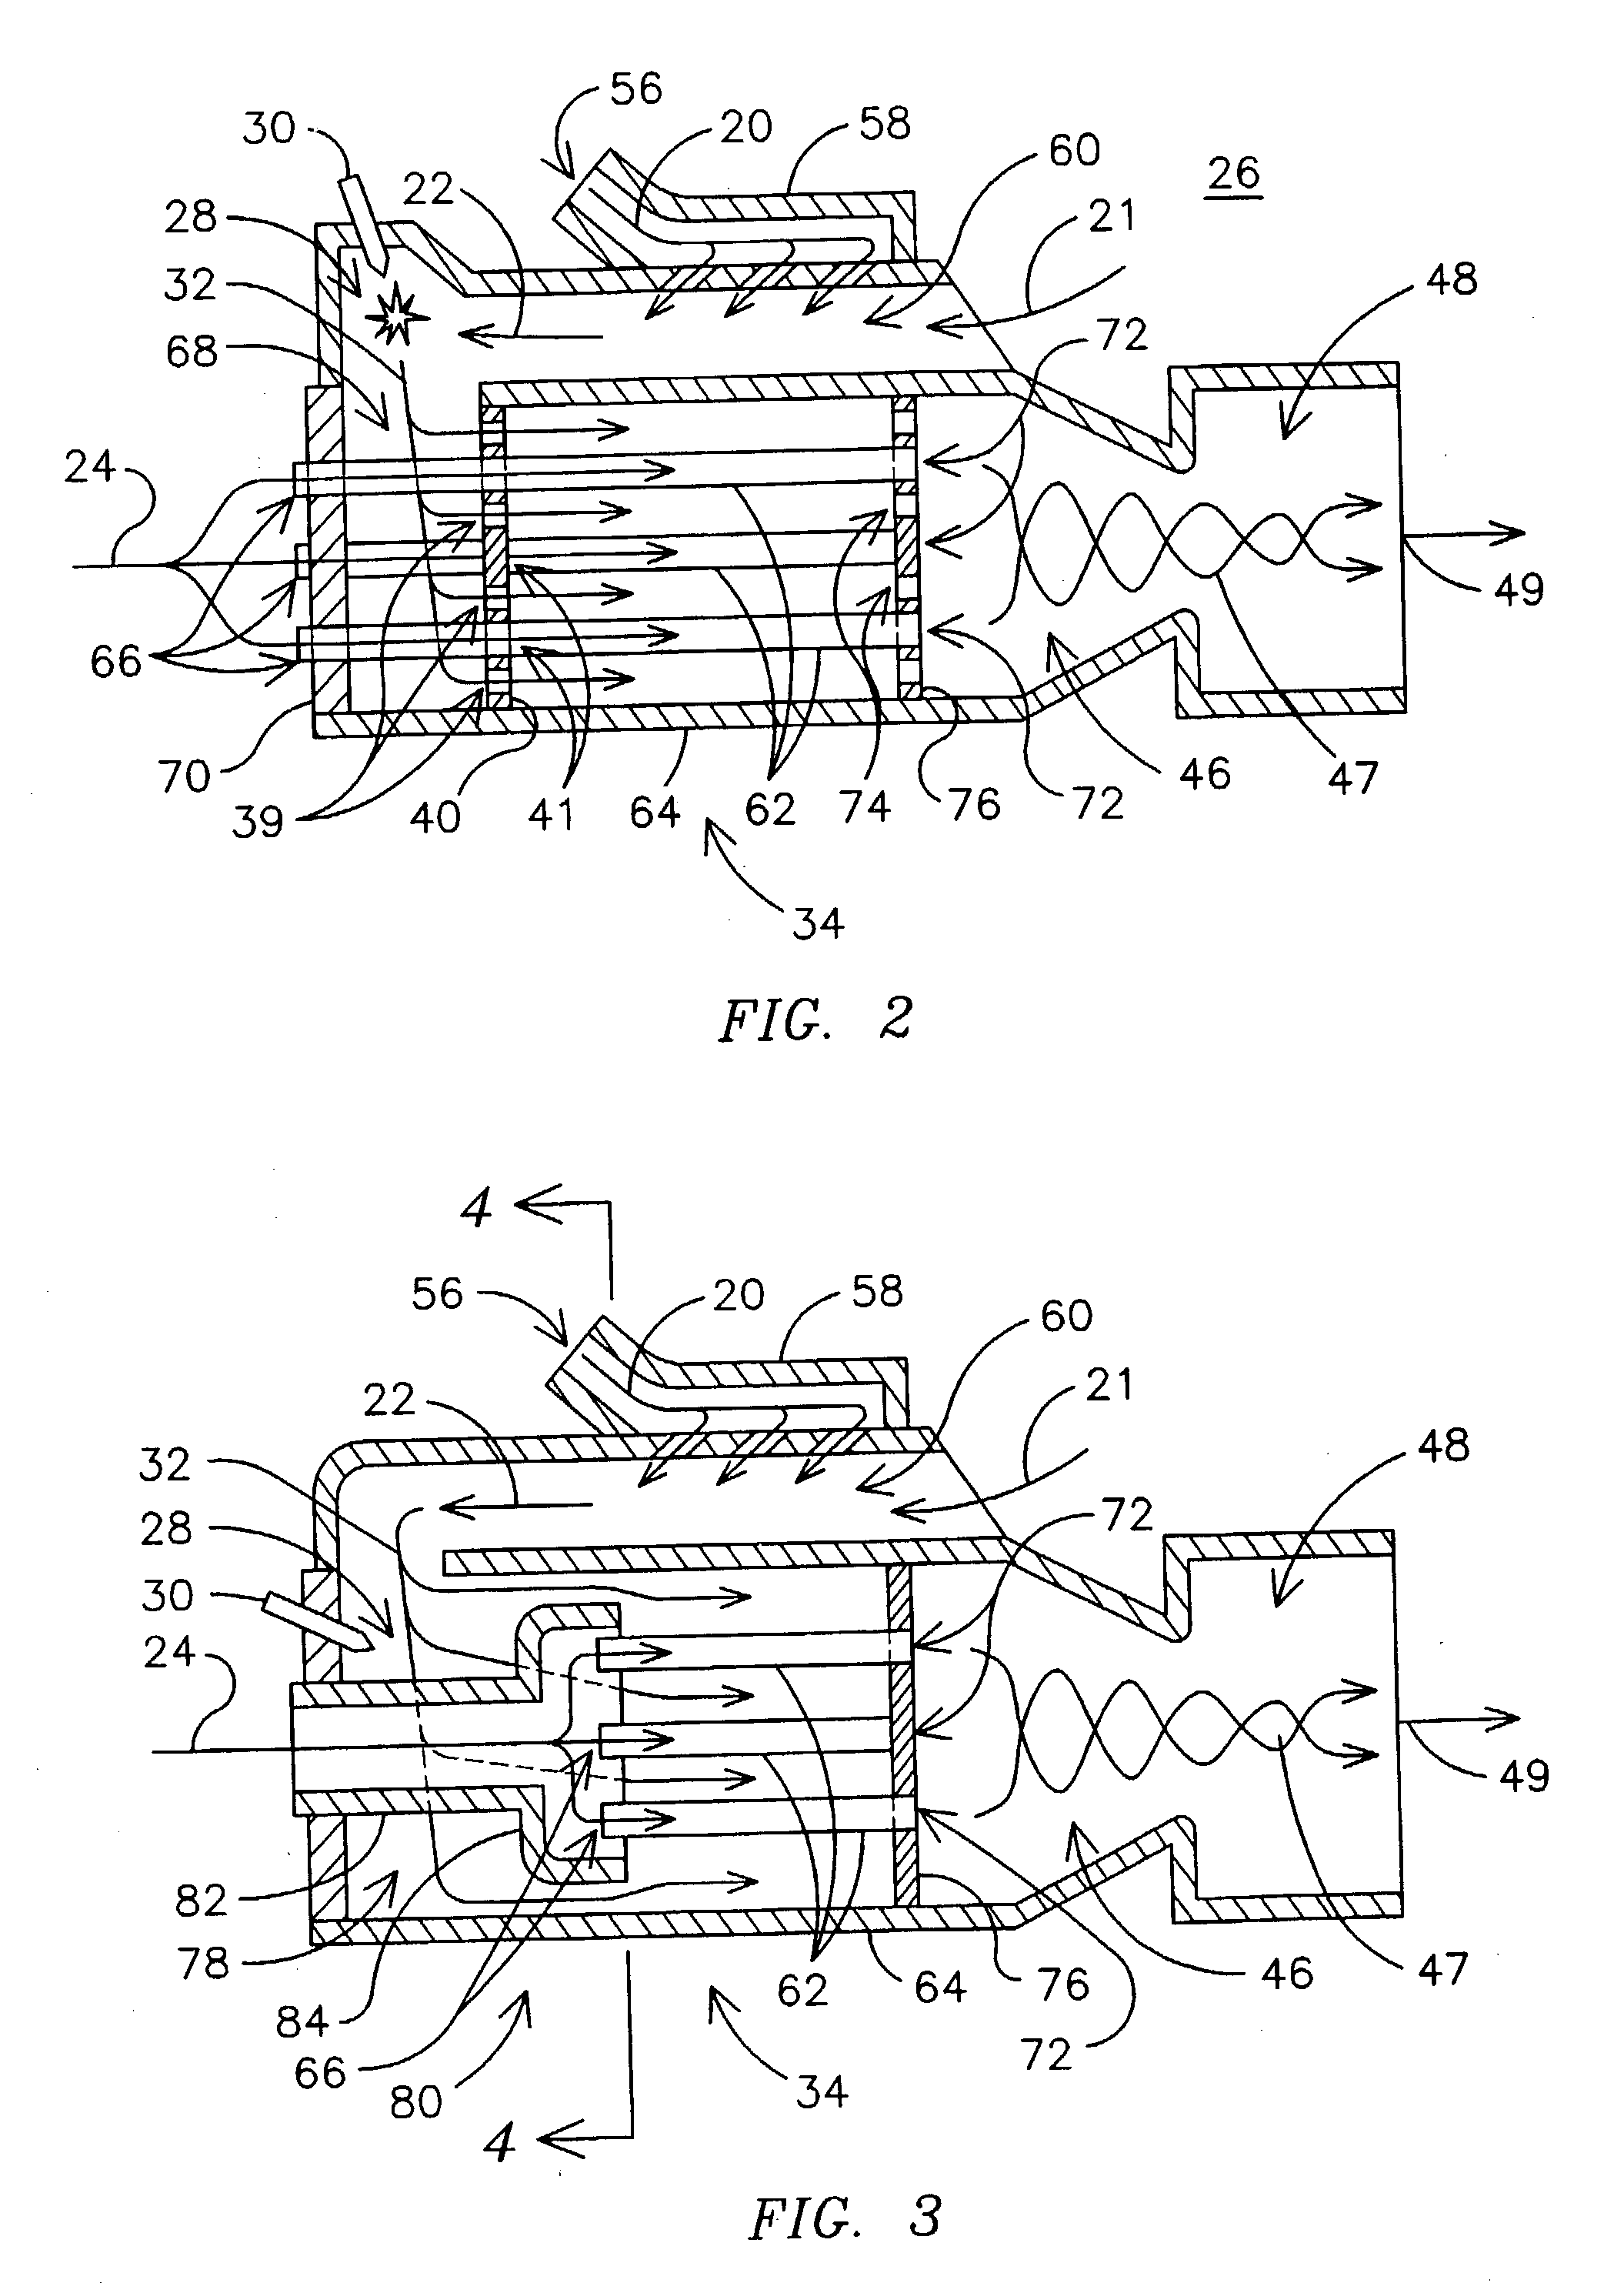 Non-catalytic combustor for reducing NOX emissions